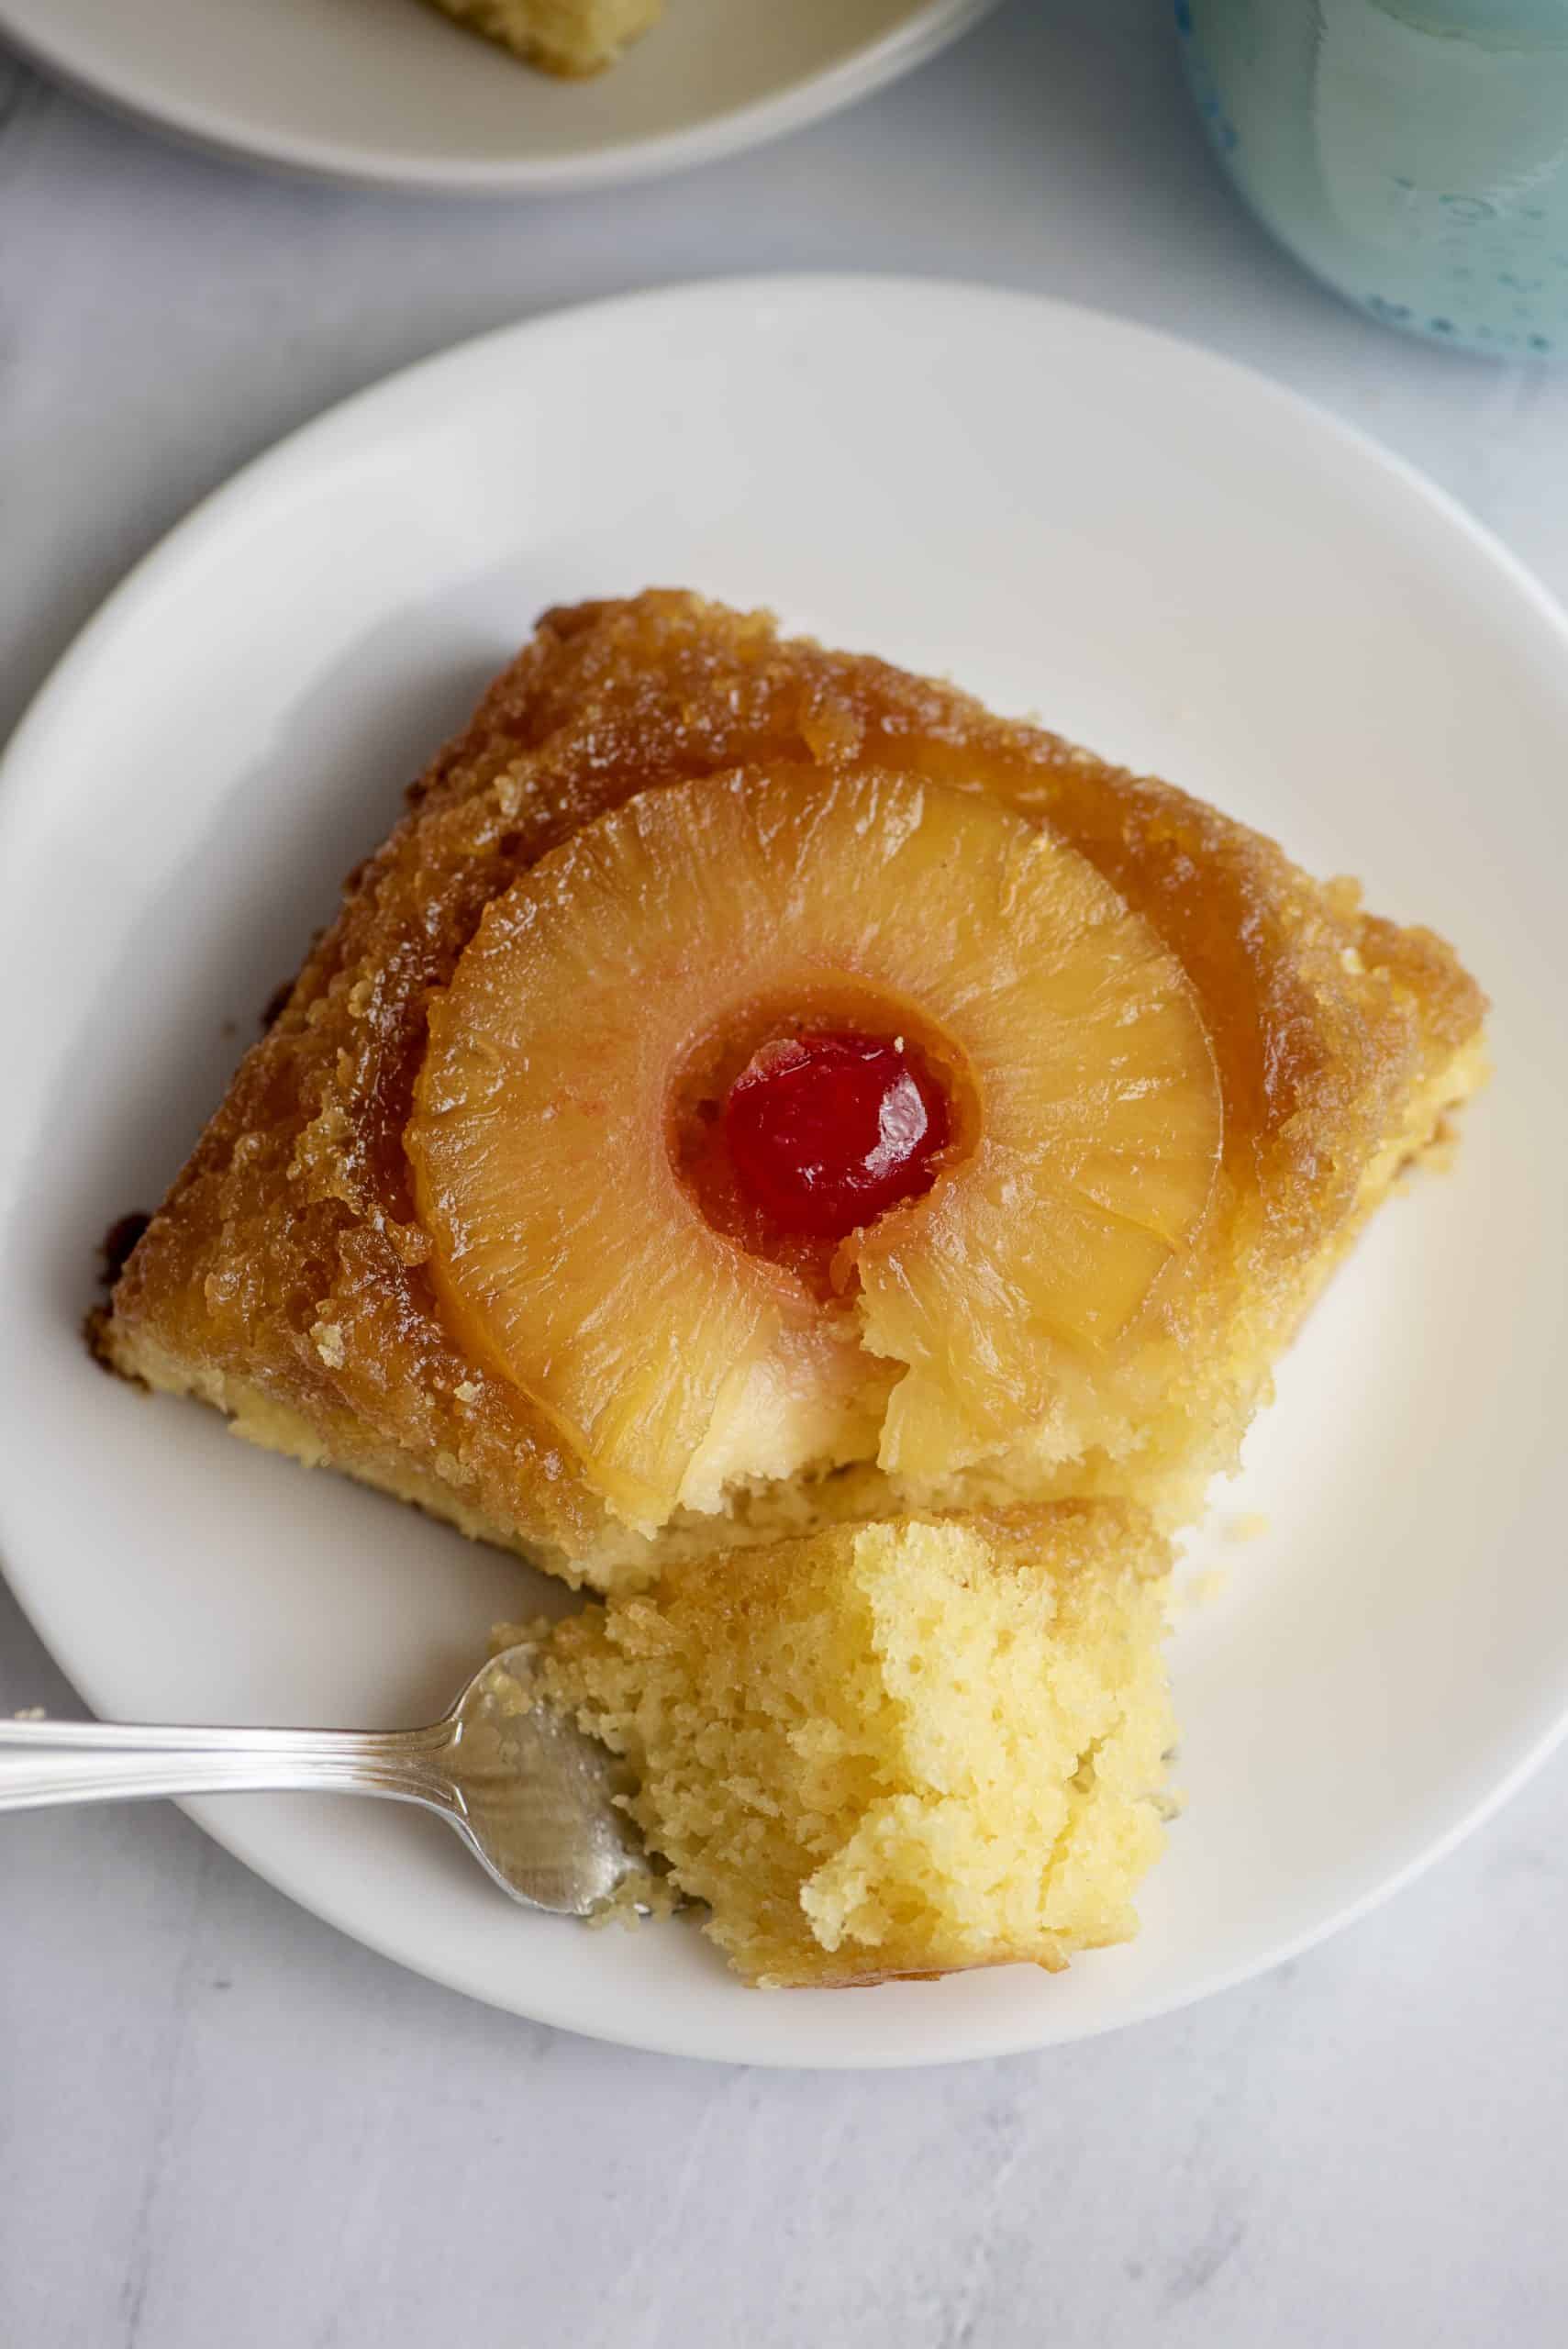 Recipes for Pineapple Cake, Cobbler and Puddin’